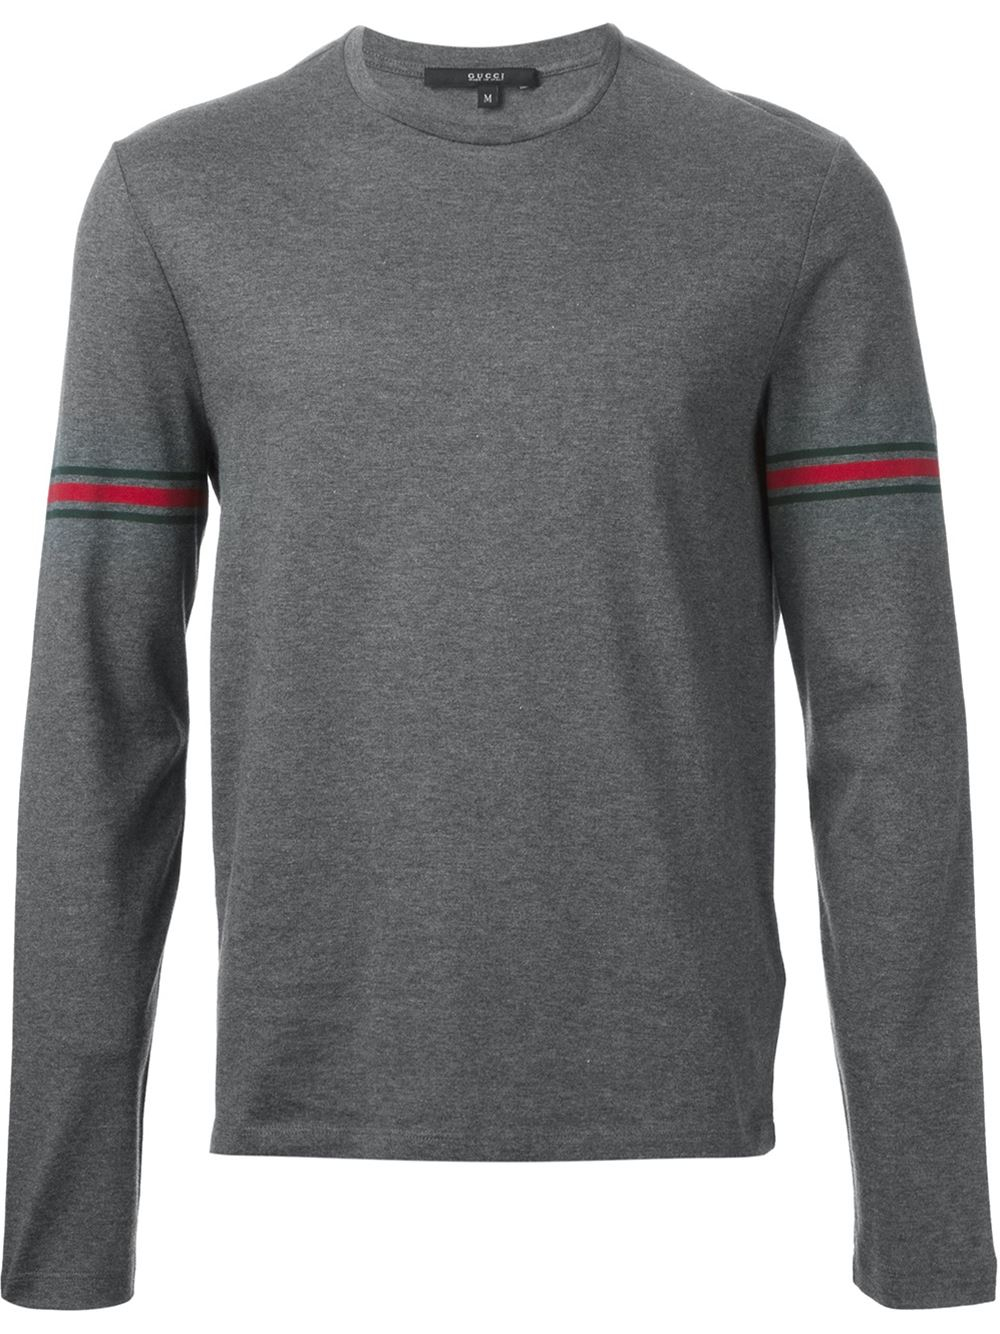 Lyst - Gucci Long Sleeve T-Shirt in Gray for Men